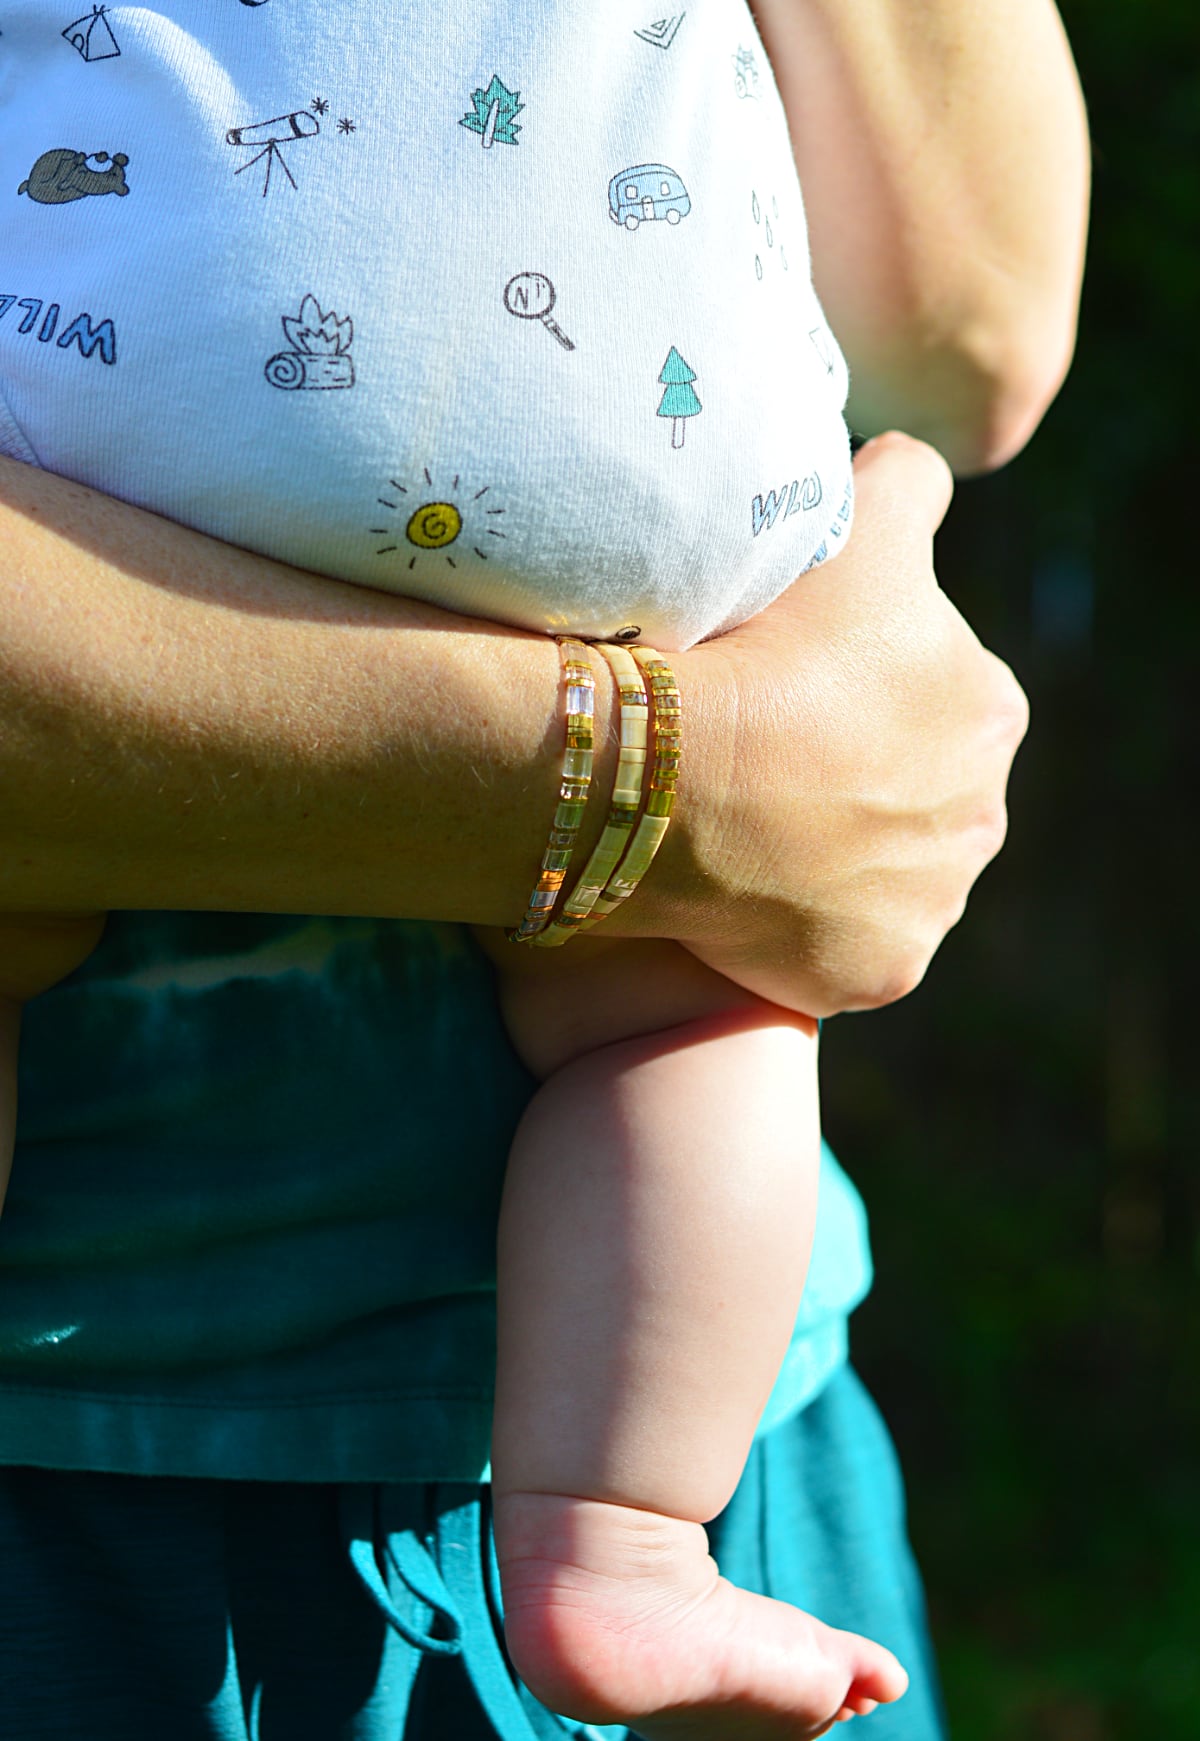 Coast + Cove bracelets designed in Florida, and baby-butt approved! Soft materials lie flat against the skin when carrying that baby around.